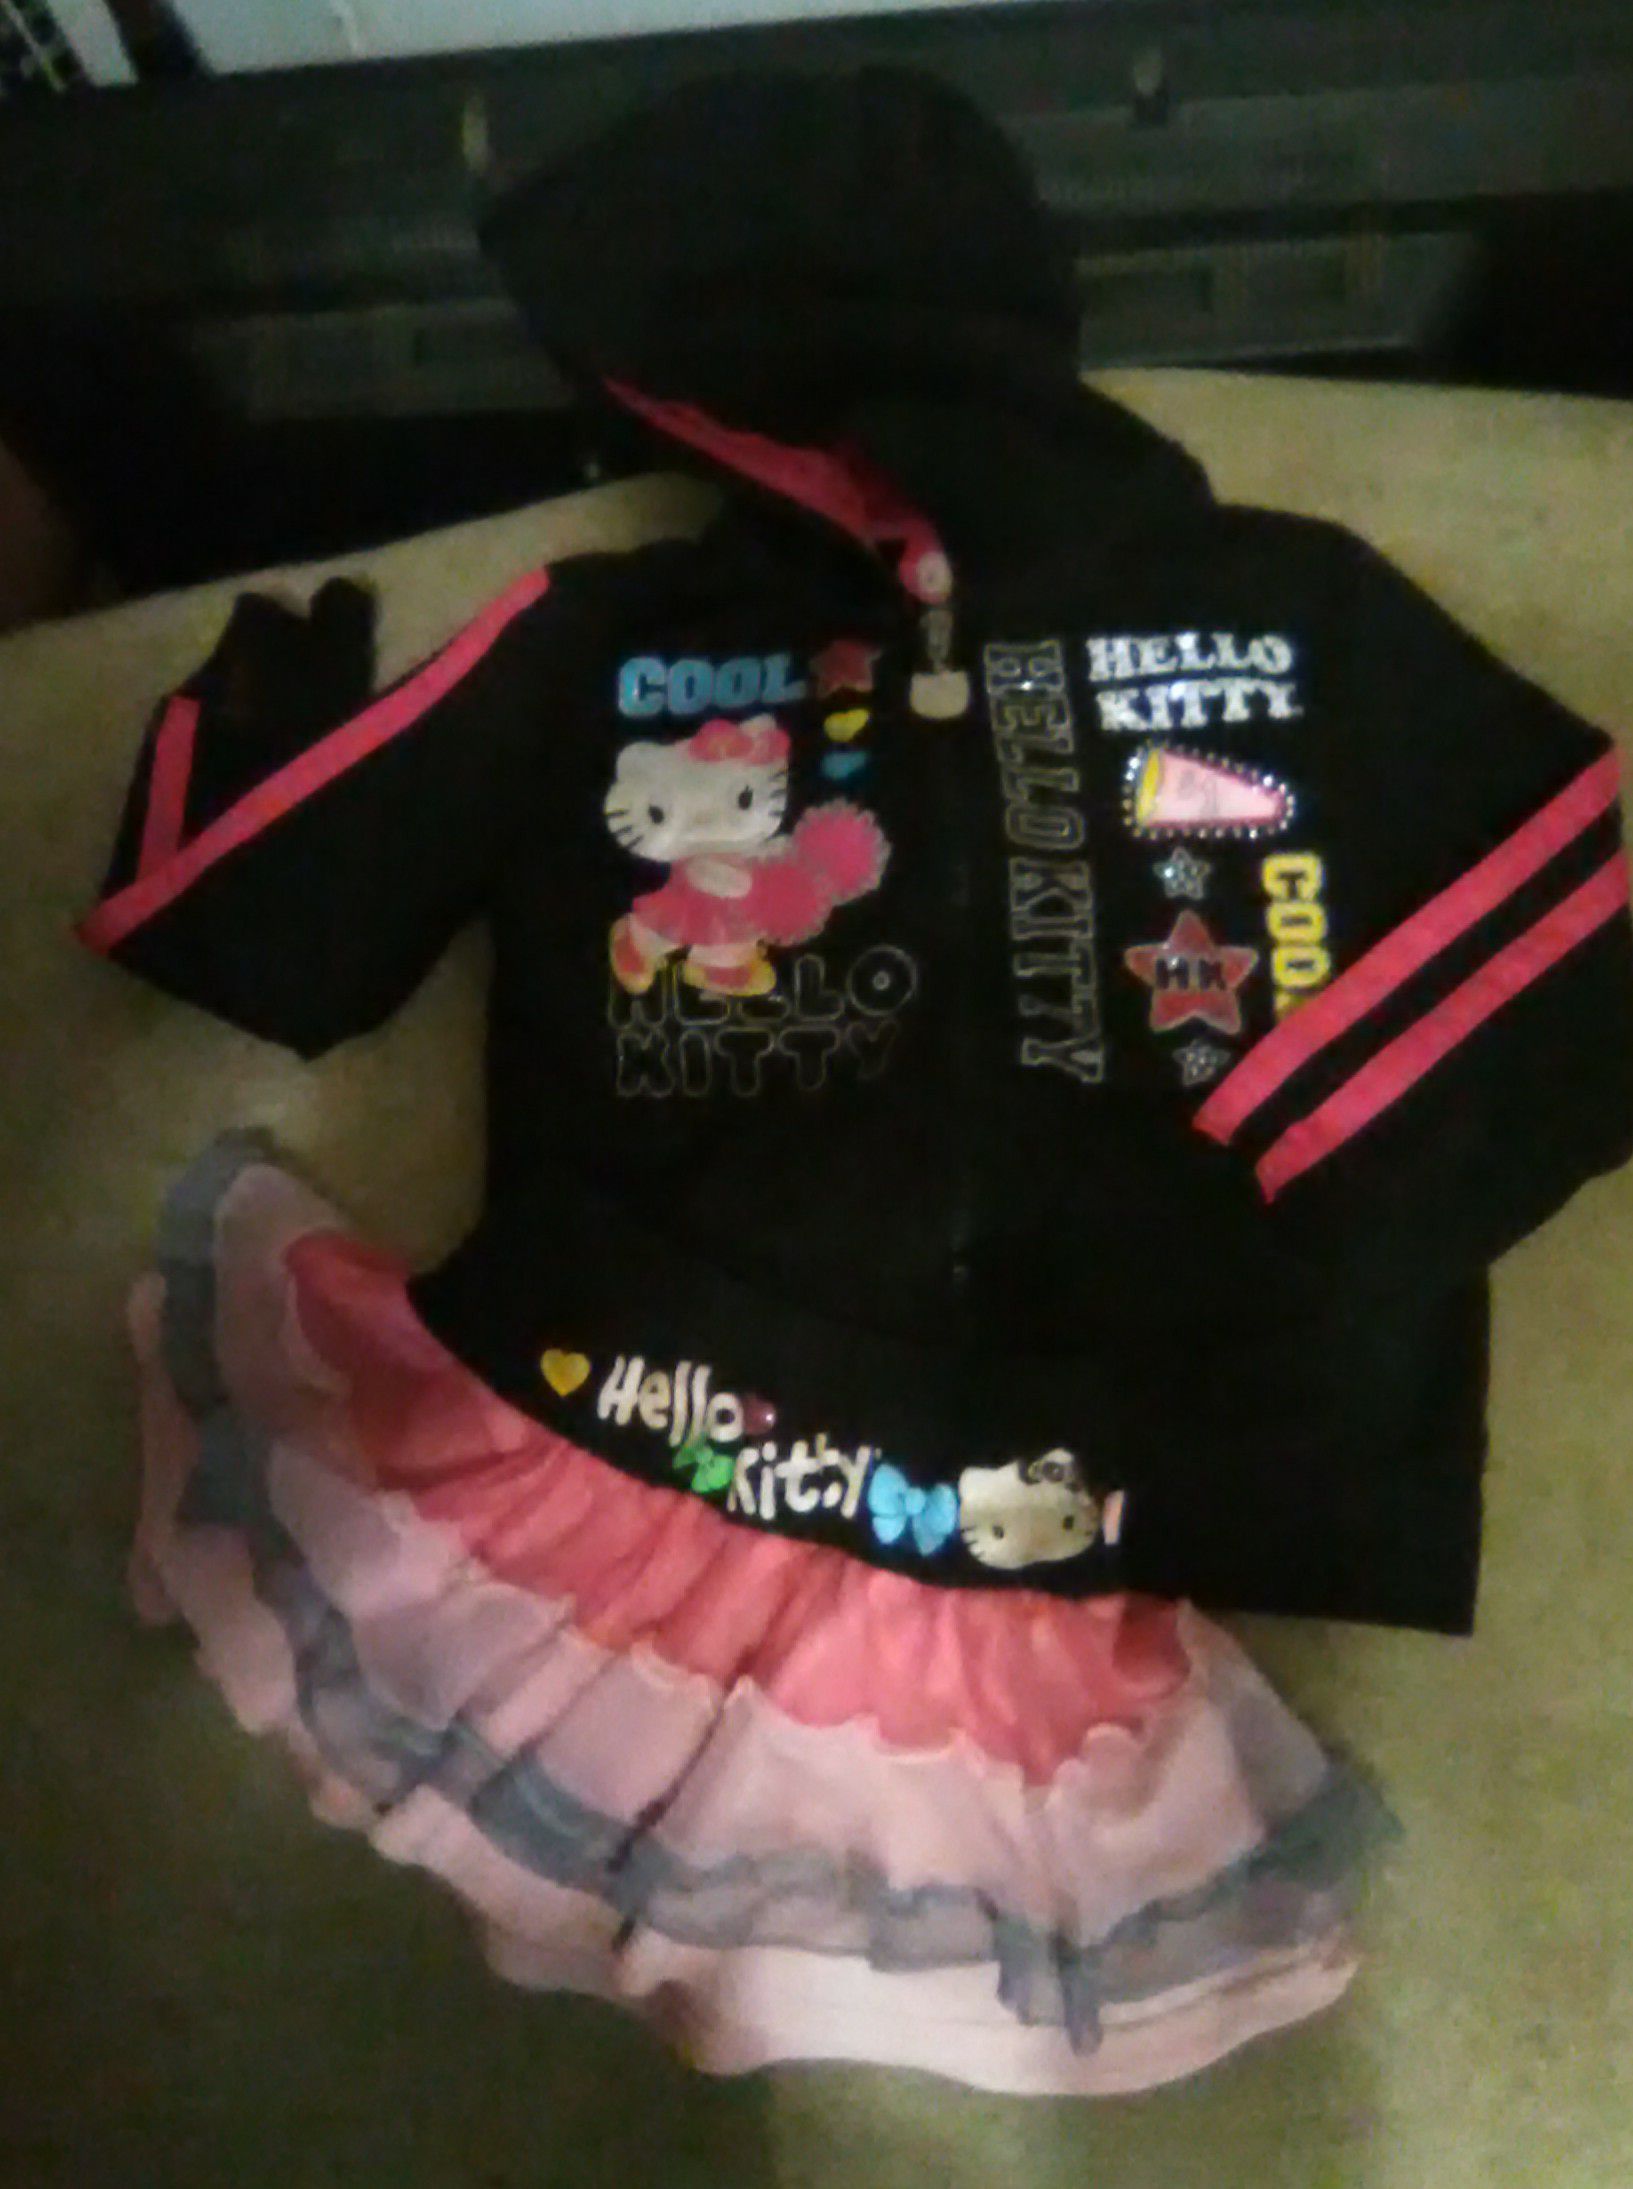 "Hello Kitty" Outfit